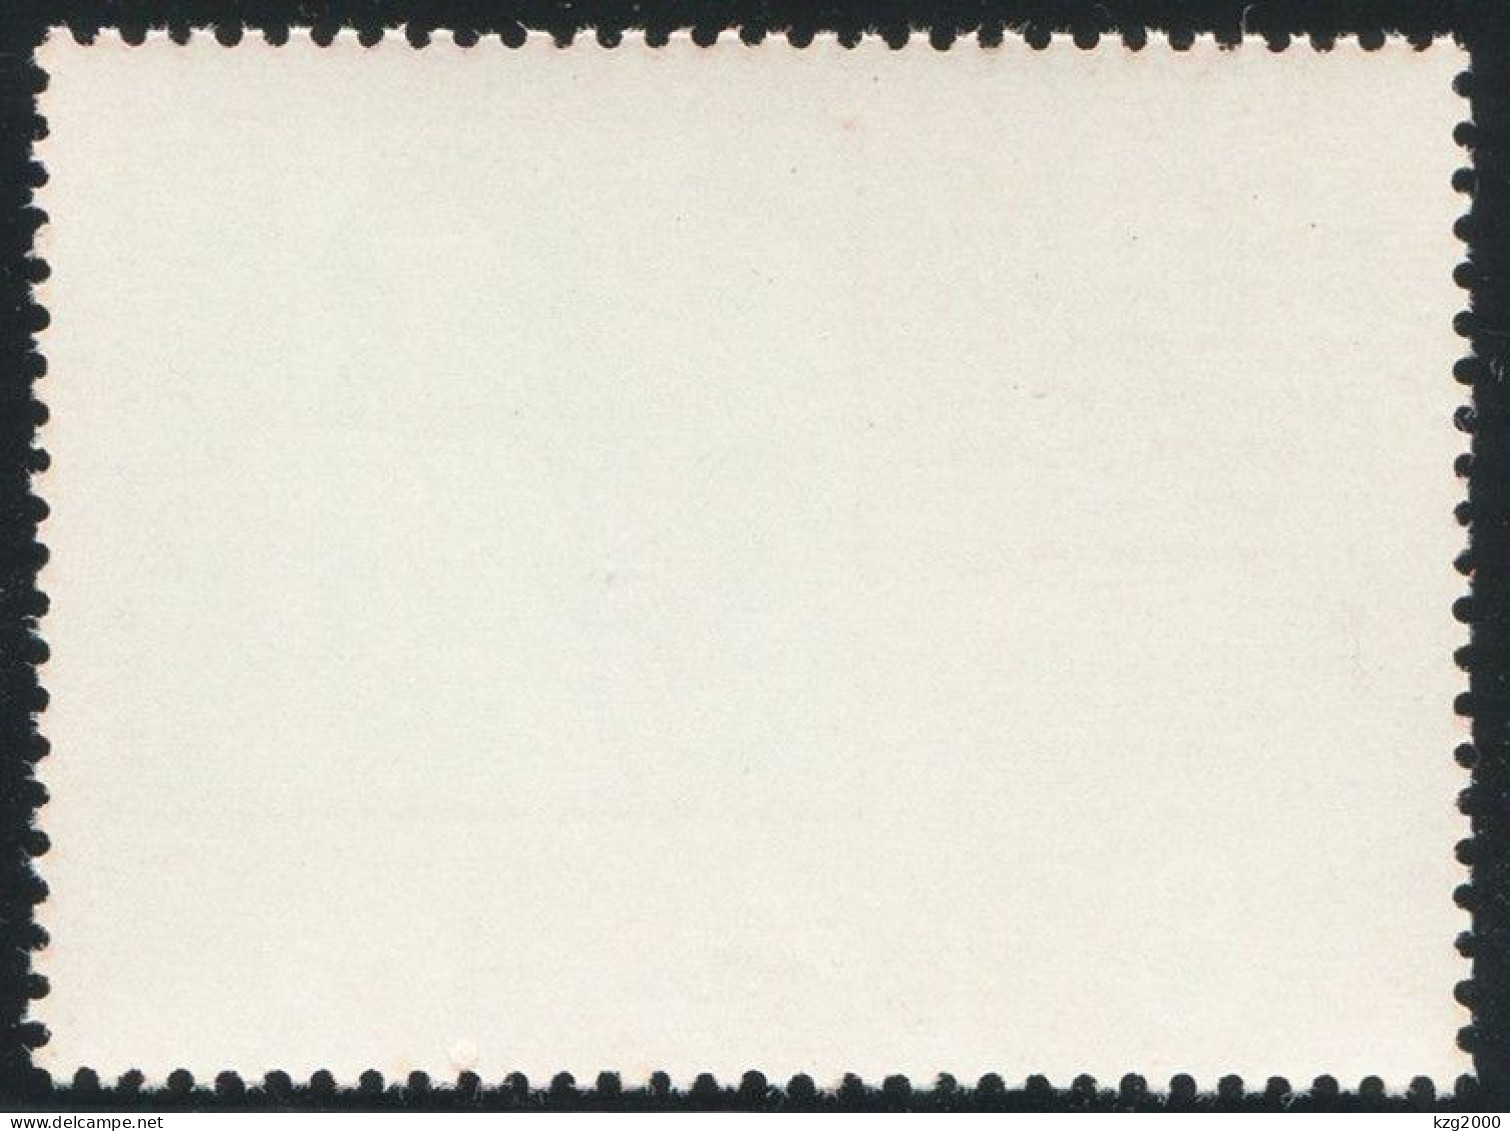 China Stamp 1968 W9 Mao Tse-tung’s Statement Of Support Of Afro-Americans OG MNH Stamps - Nuovi